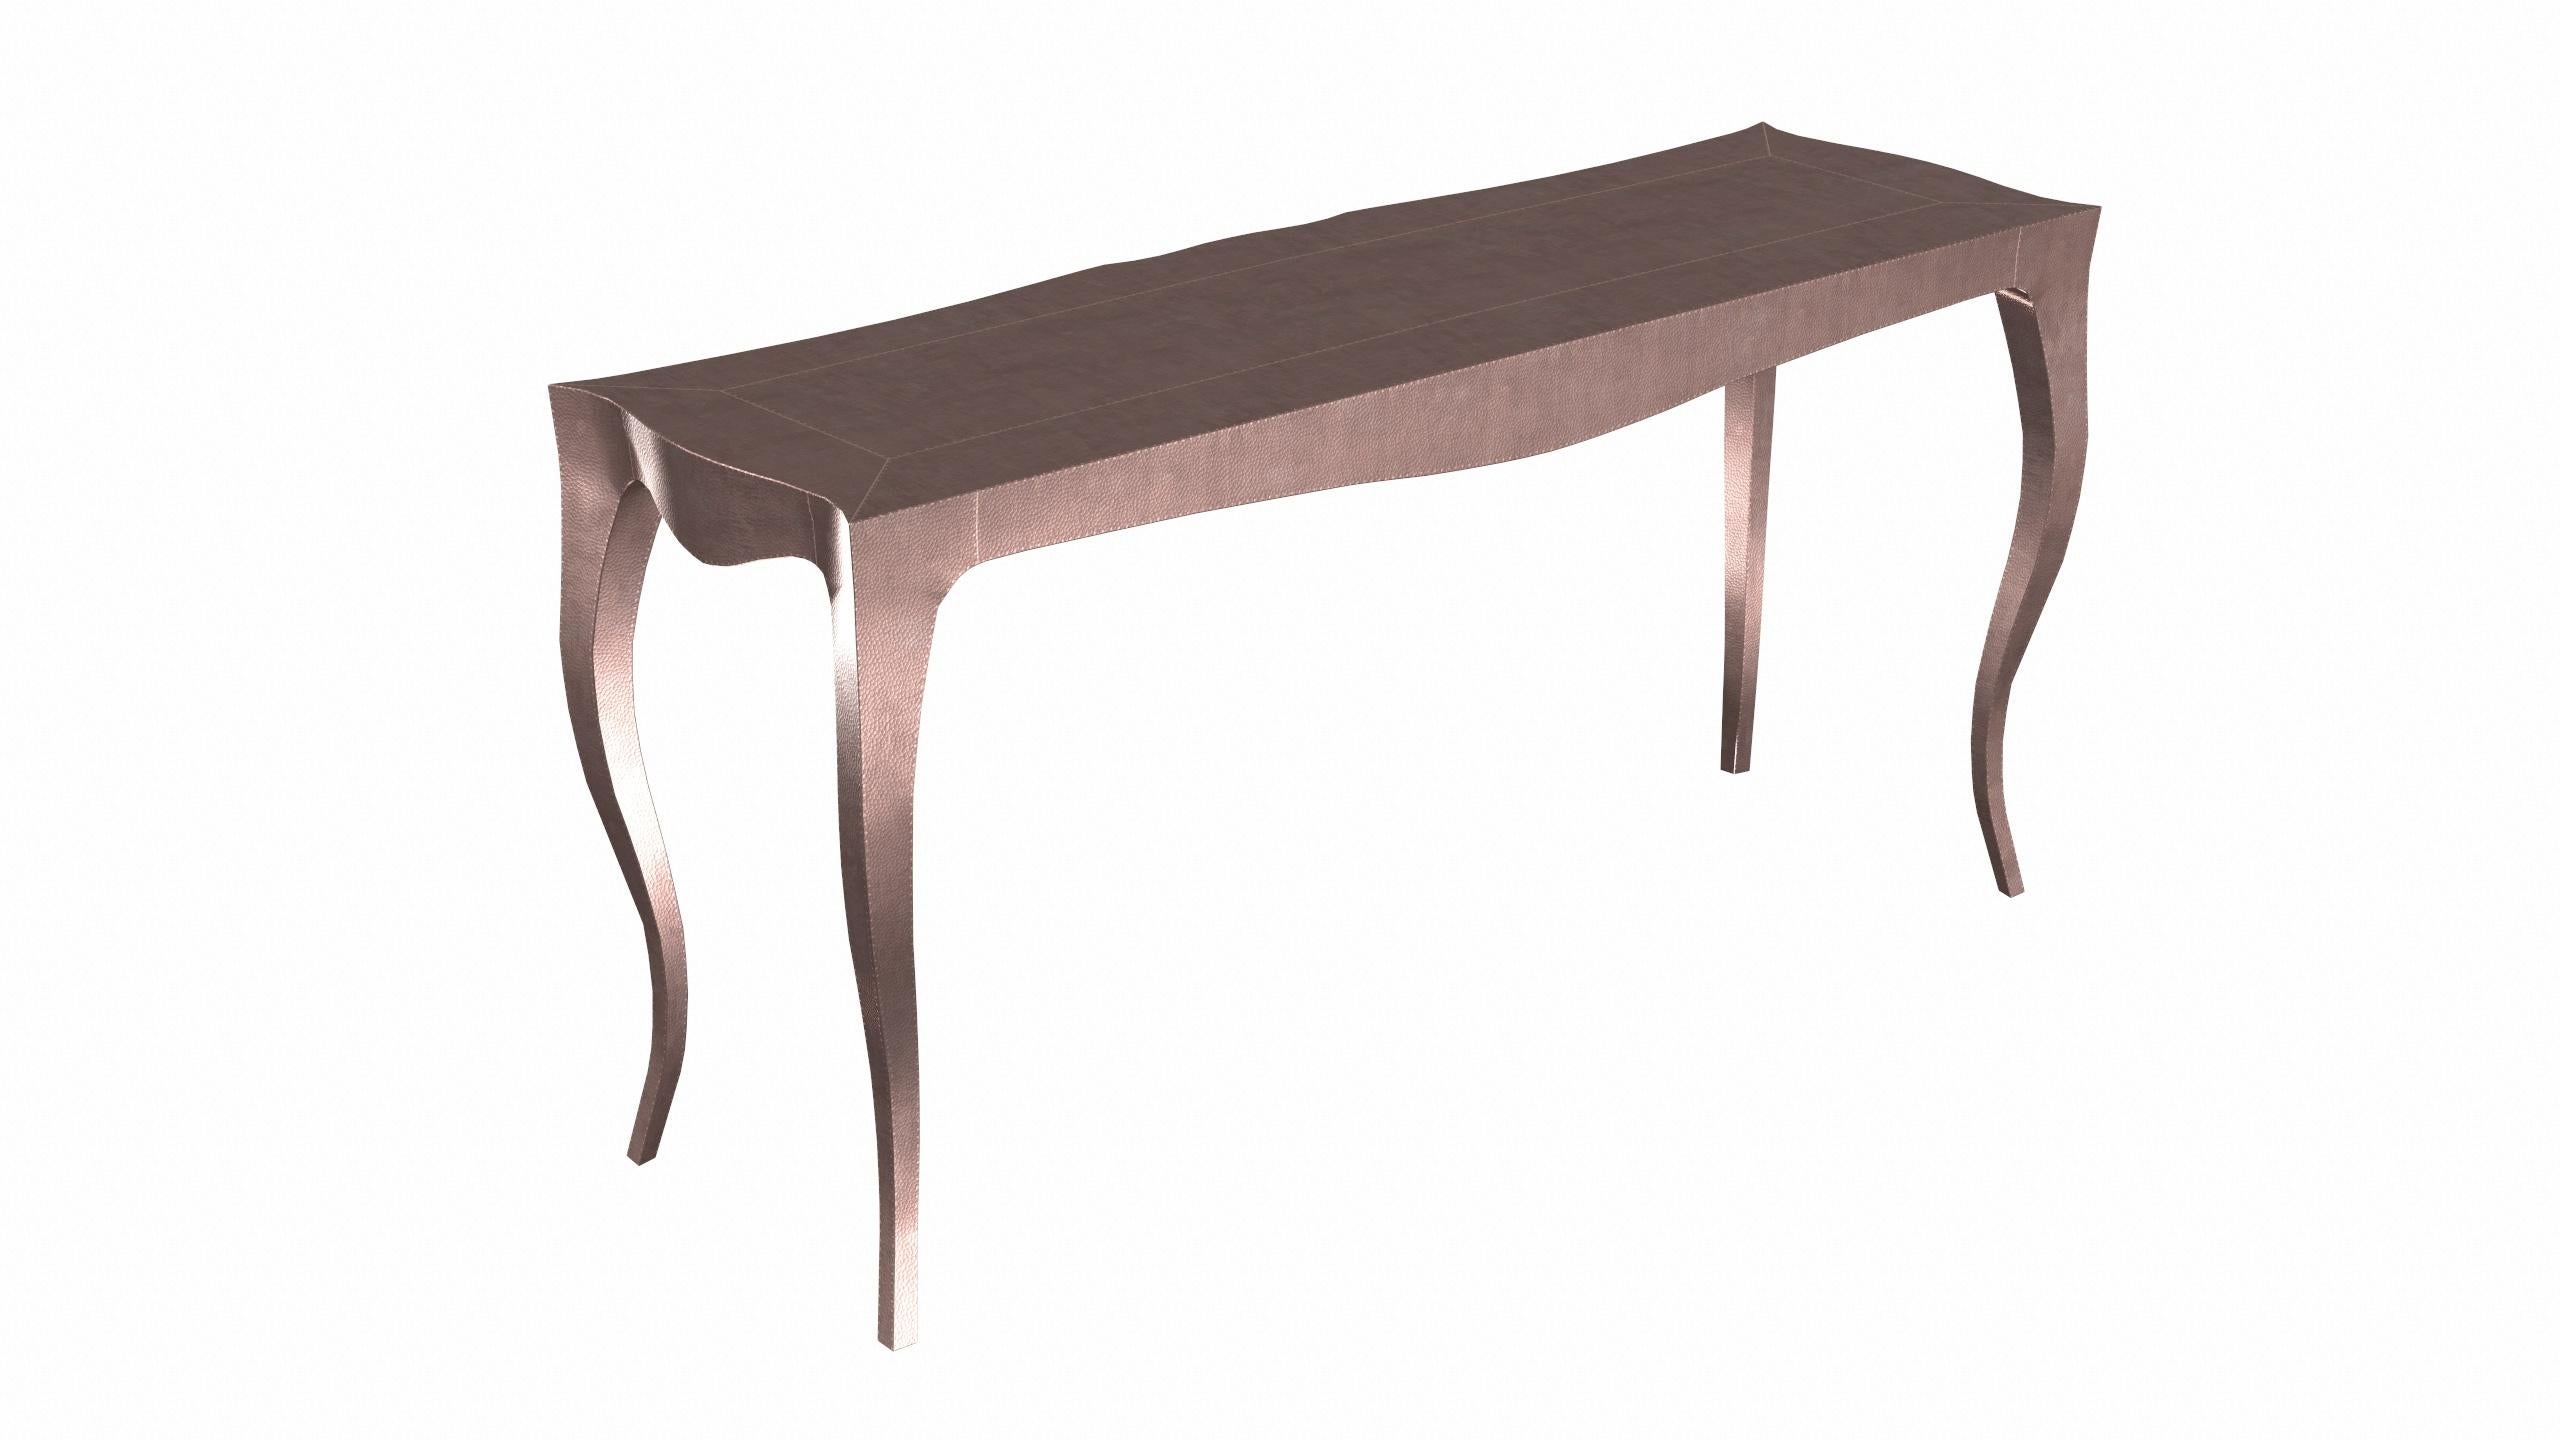 Metal Louise Console Art Nouveau Tray Tables Mid. Hammered Copper by Paul Mathieu  For Sale